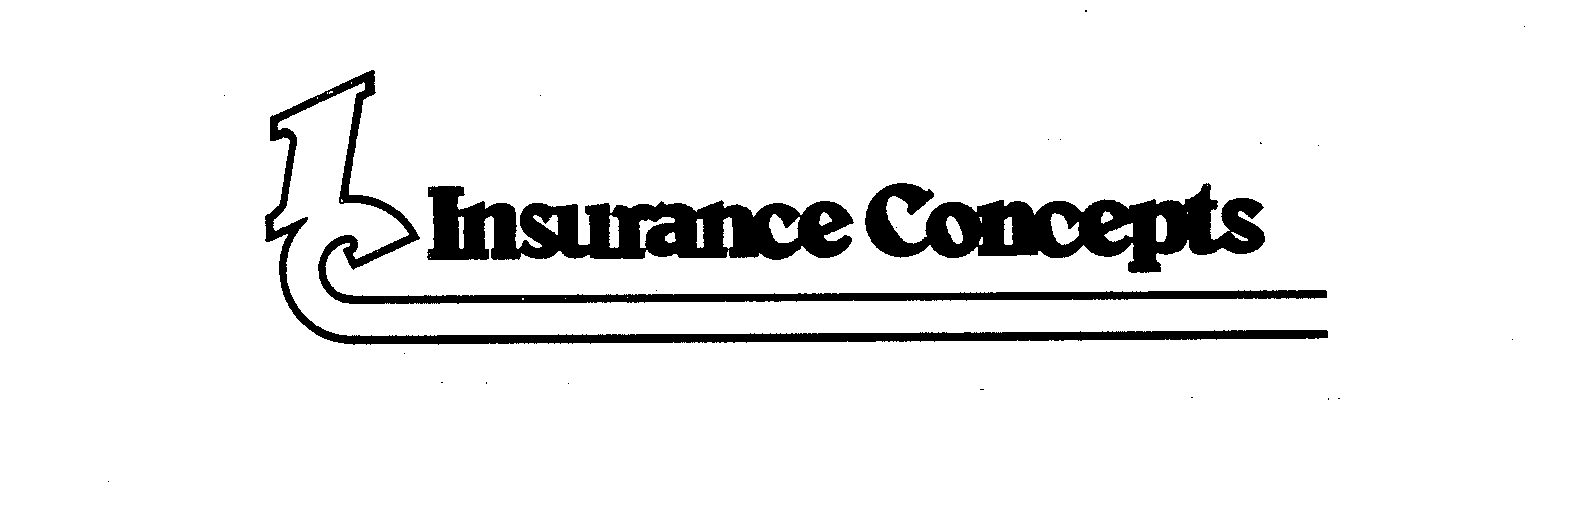  IC INSURANCE CONCEPTS